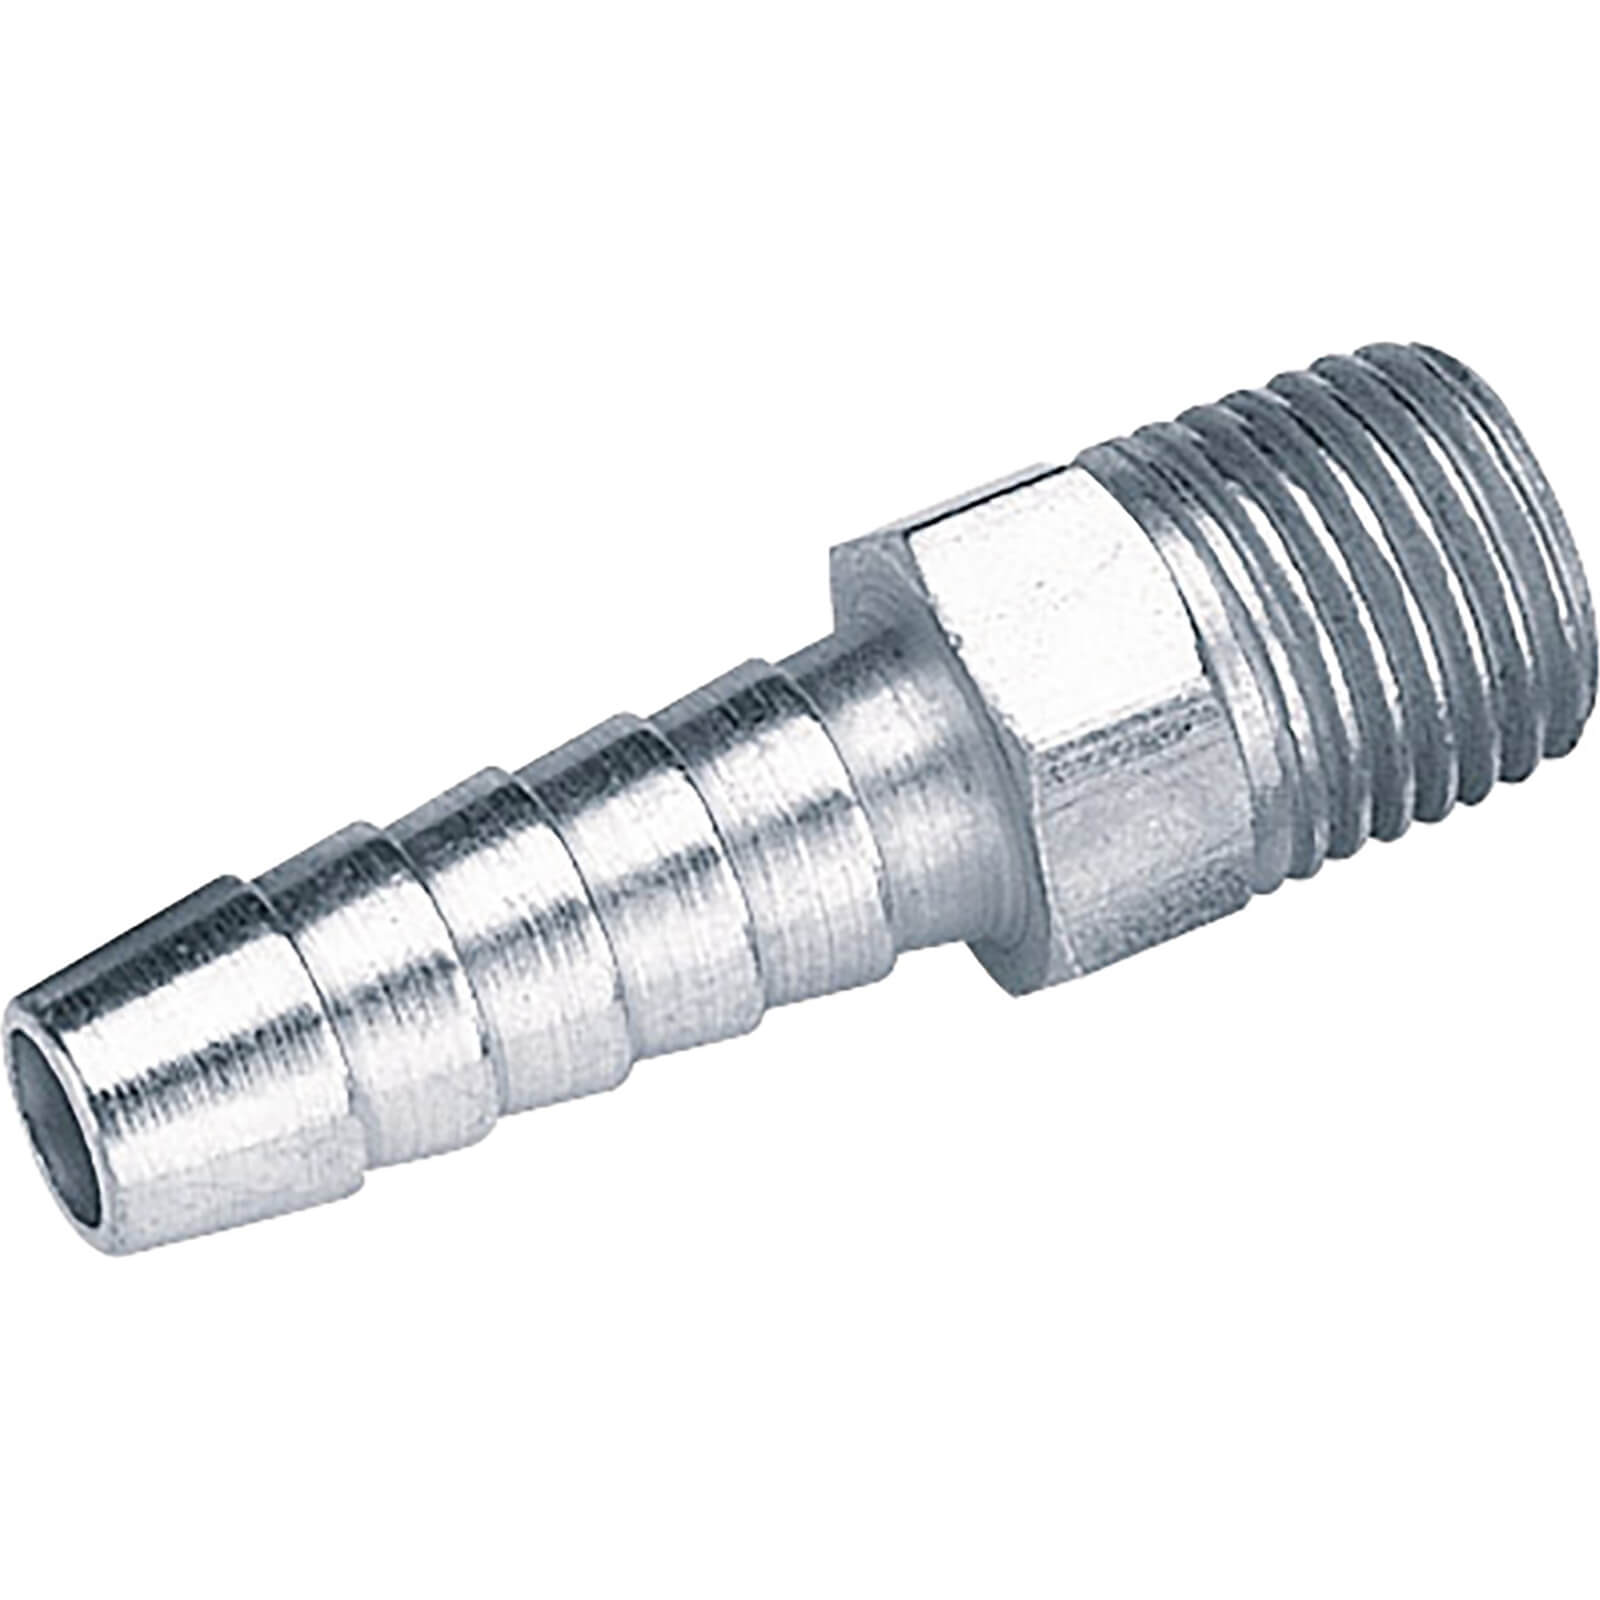 Image of Draper PCL Tailpiece Air Line Fitting BSPT Male Thread 1/4" BSP 5/16" Pack of 5